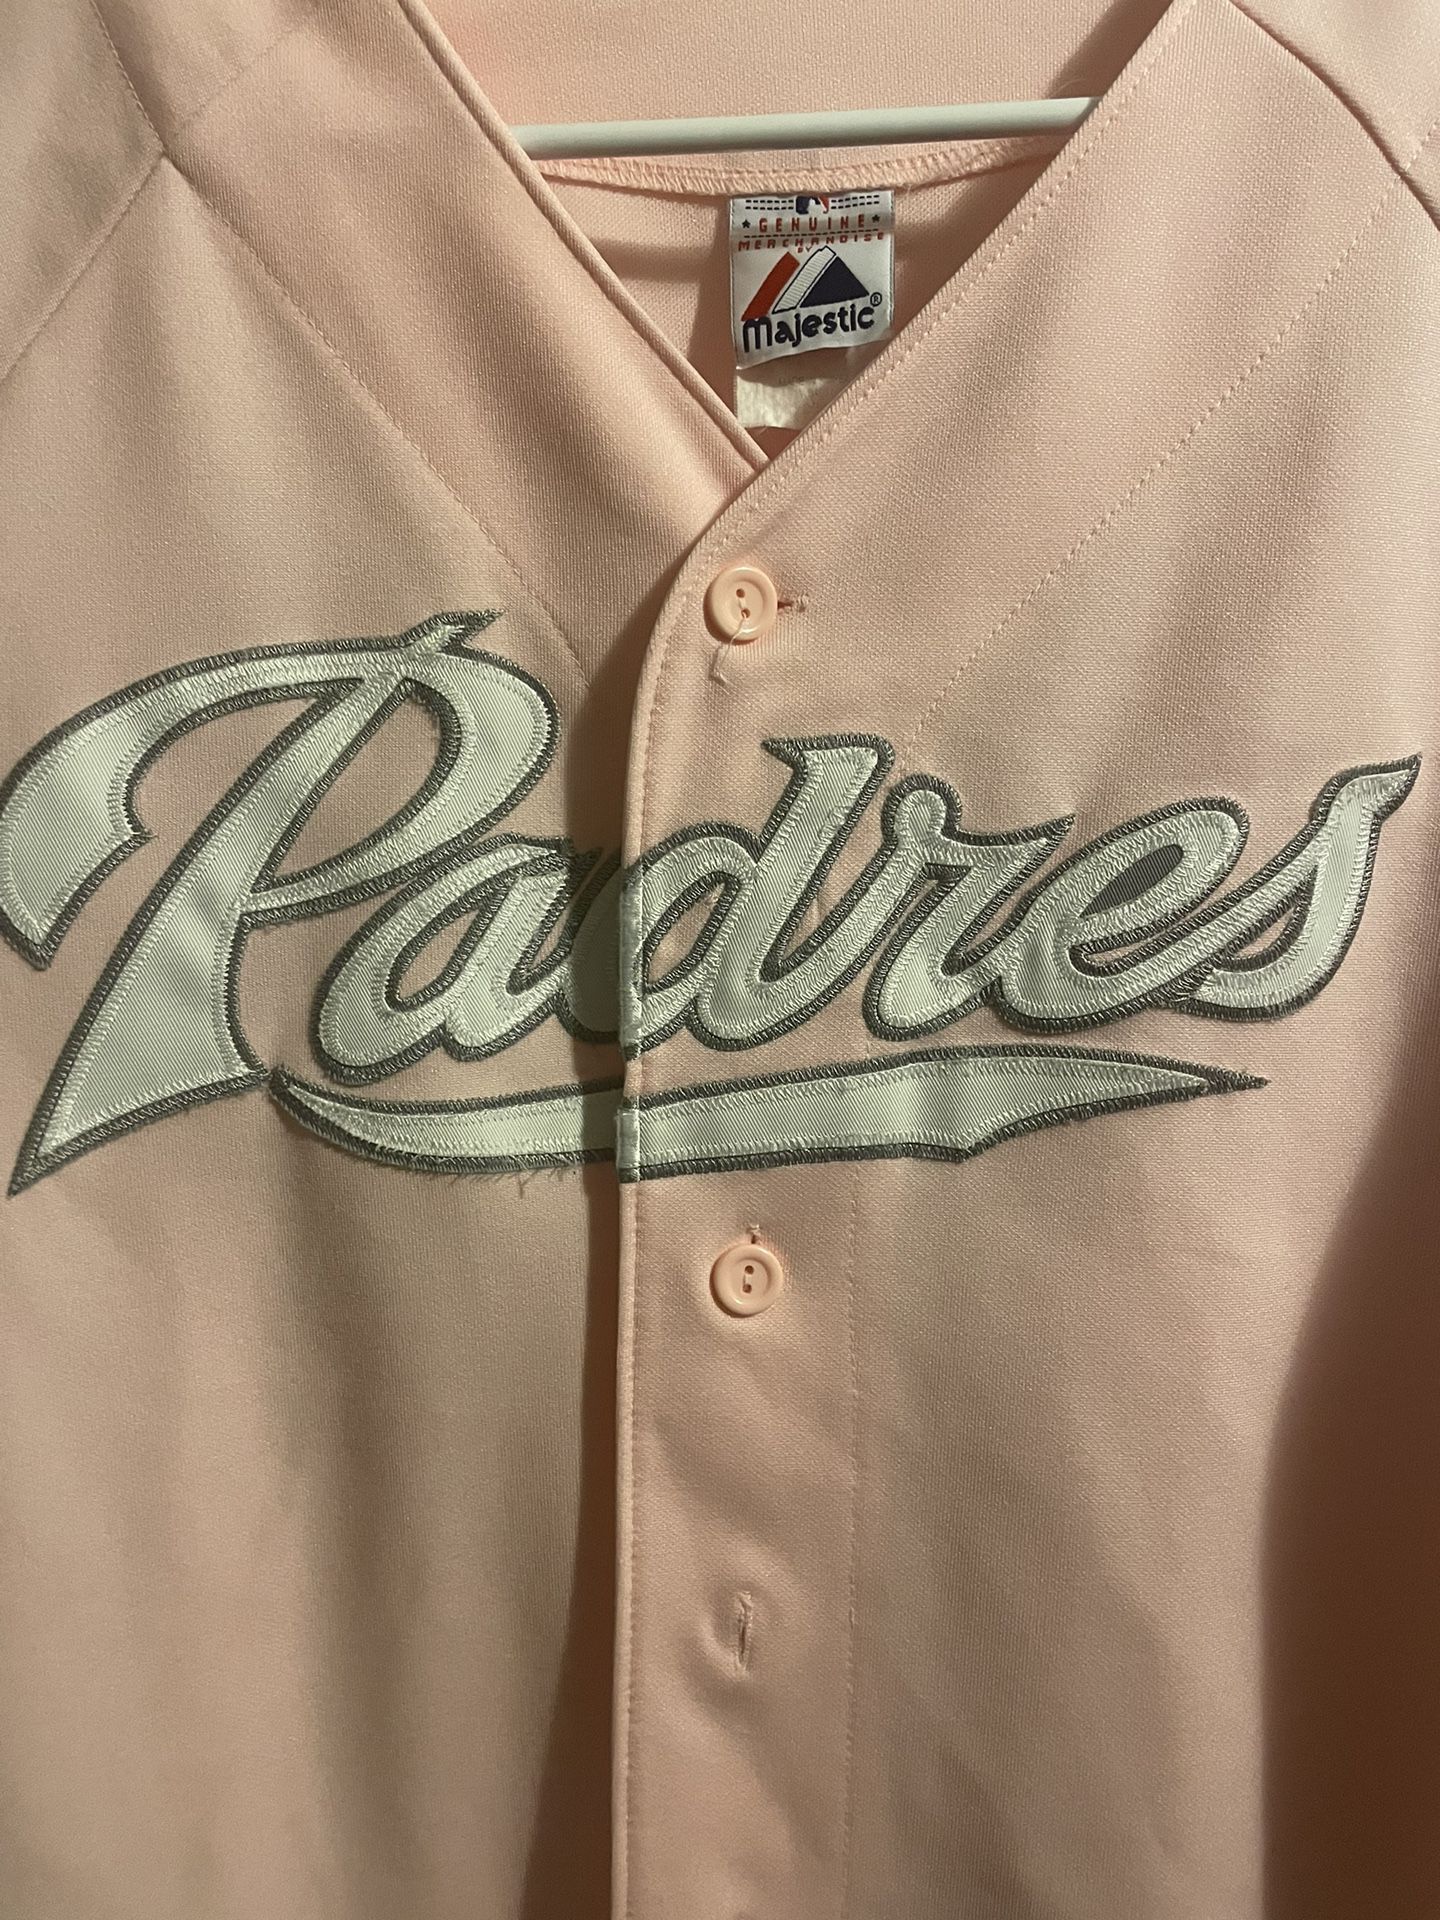 padres green and pink jersey